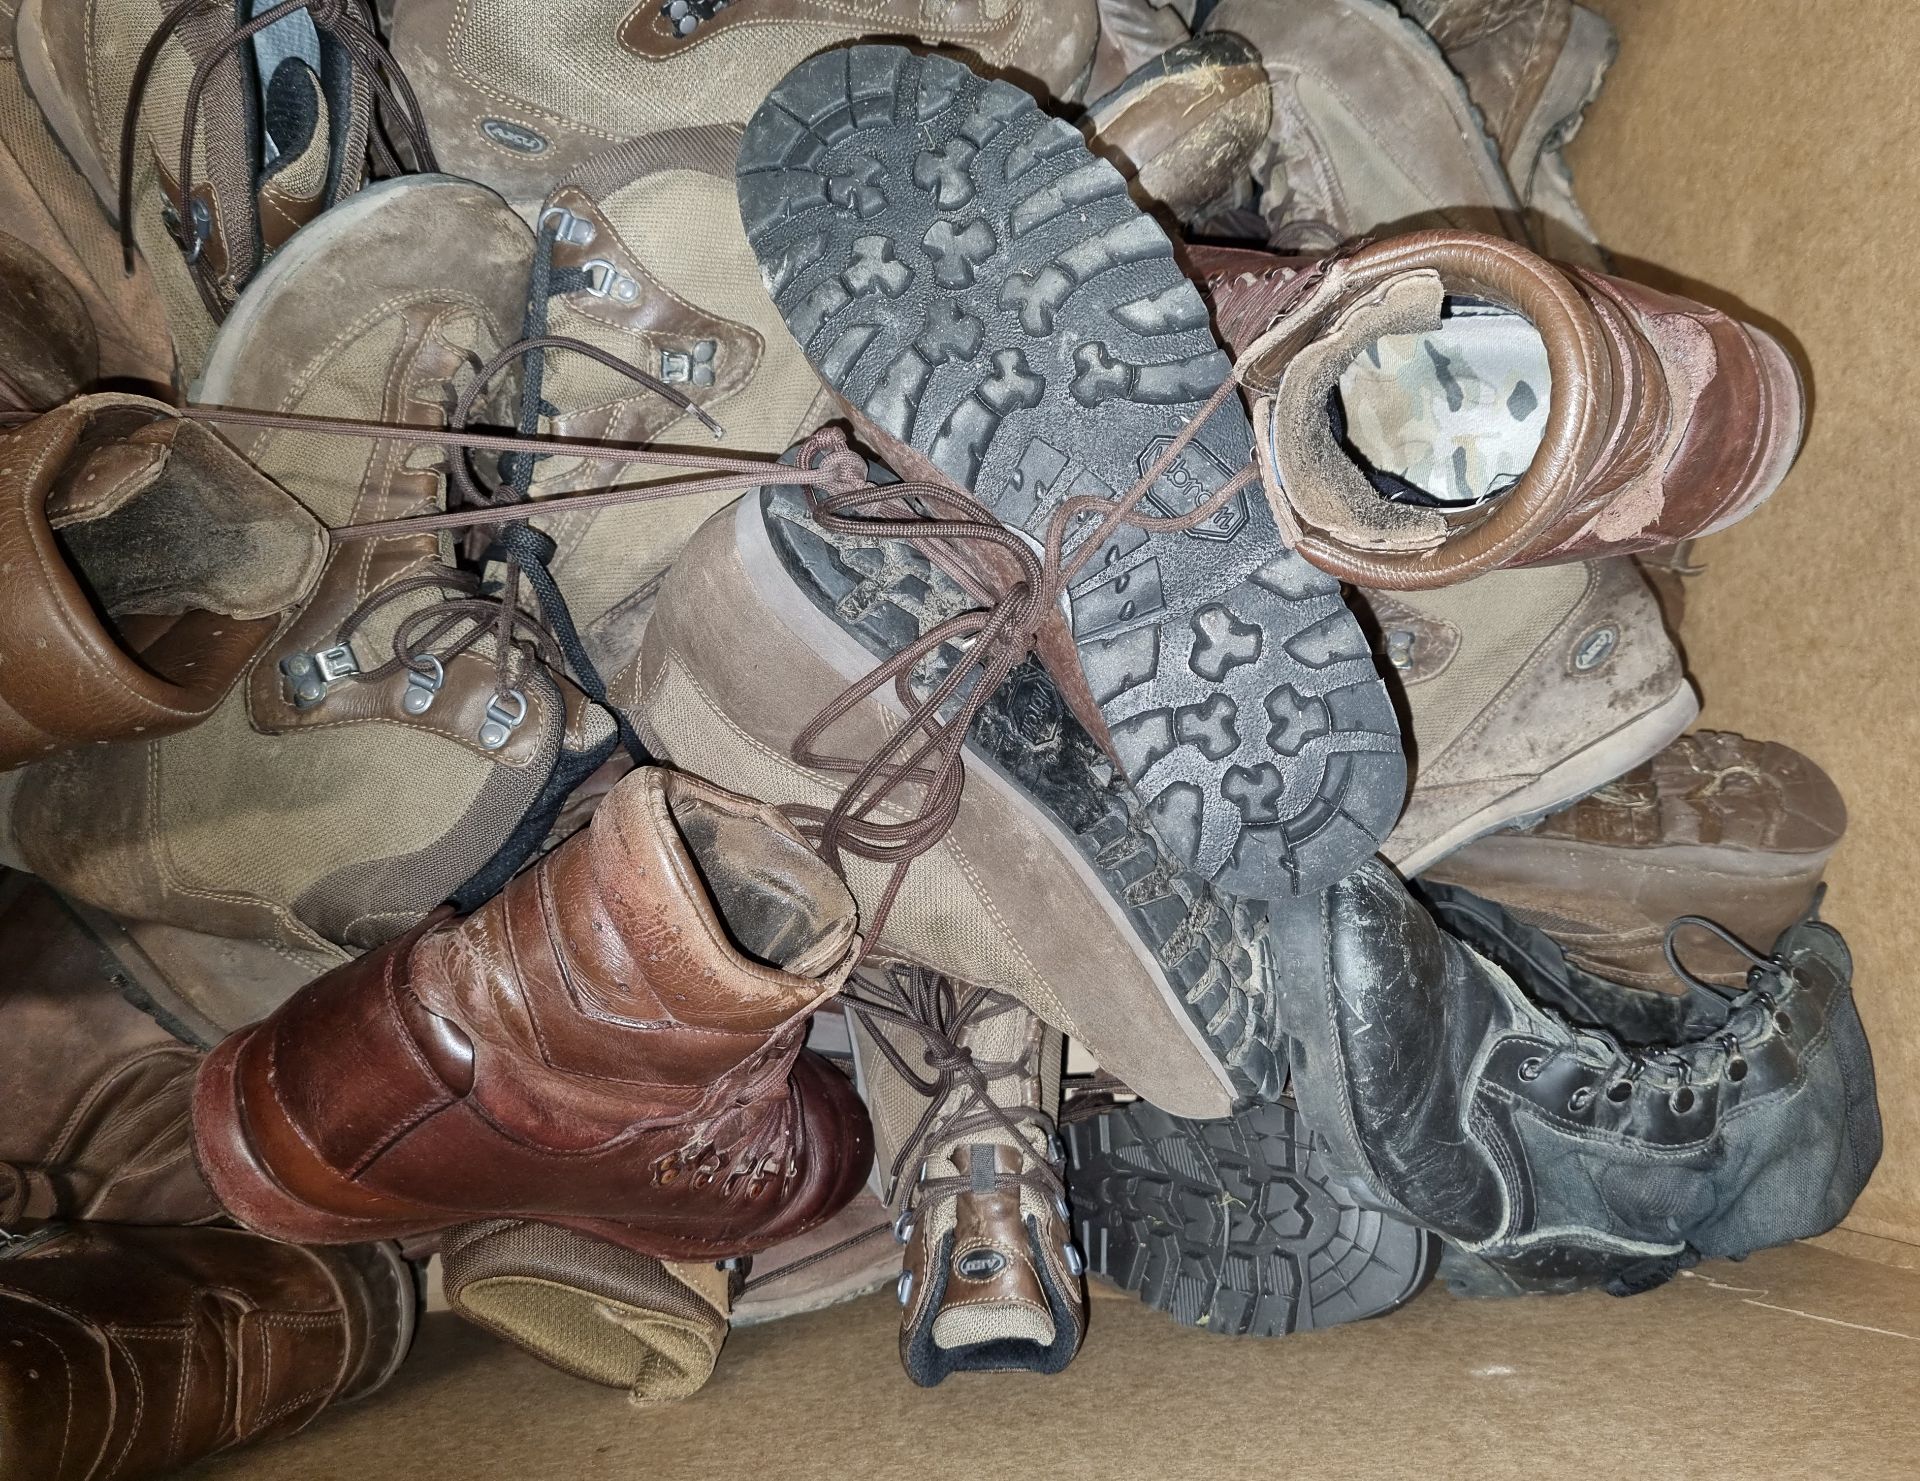 50x pairs of Various Boots including Magnum, Iturri & YDS - mixed grades and sizes - Image 4 of 5